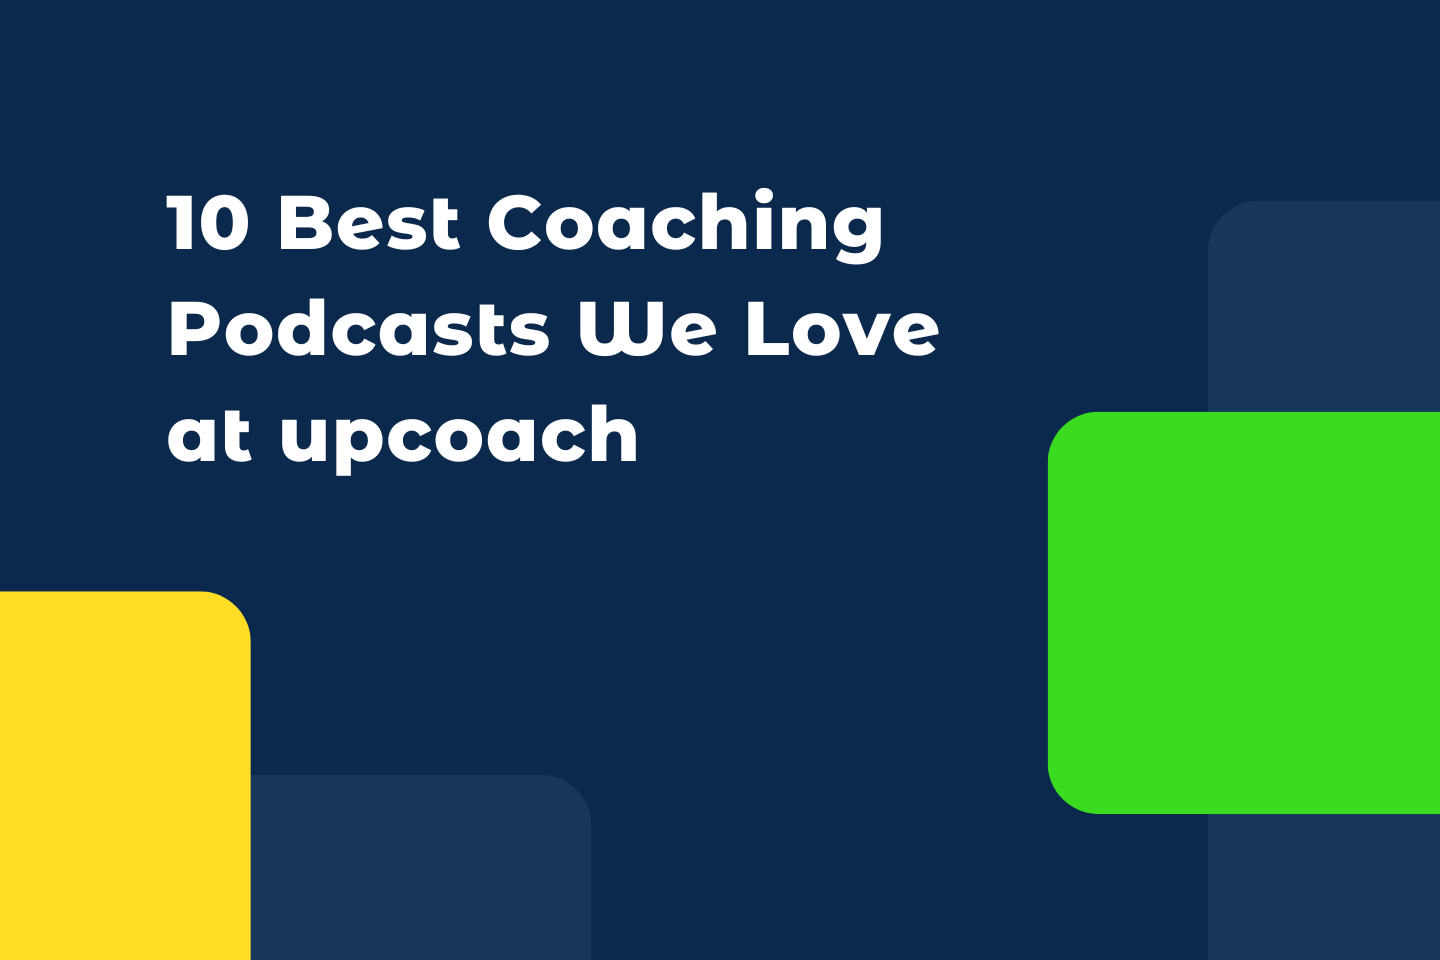 10 Best Coaching Podcasts We Love at upcoach